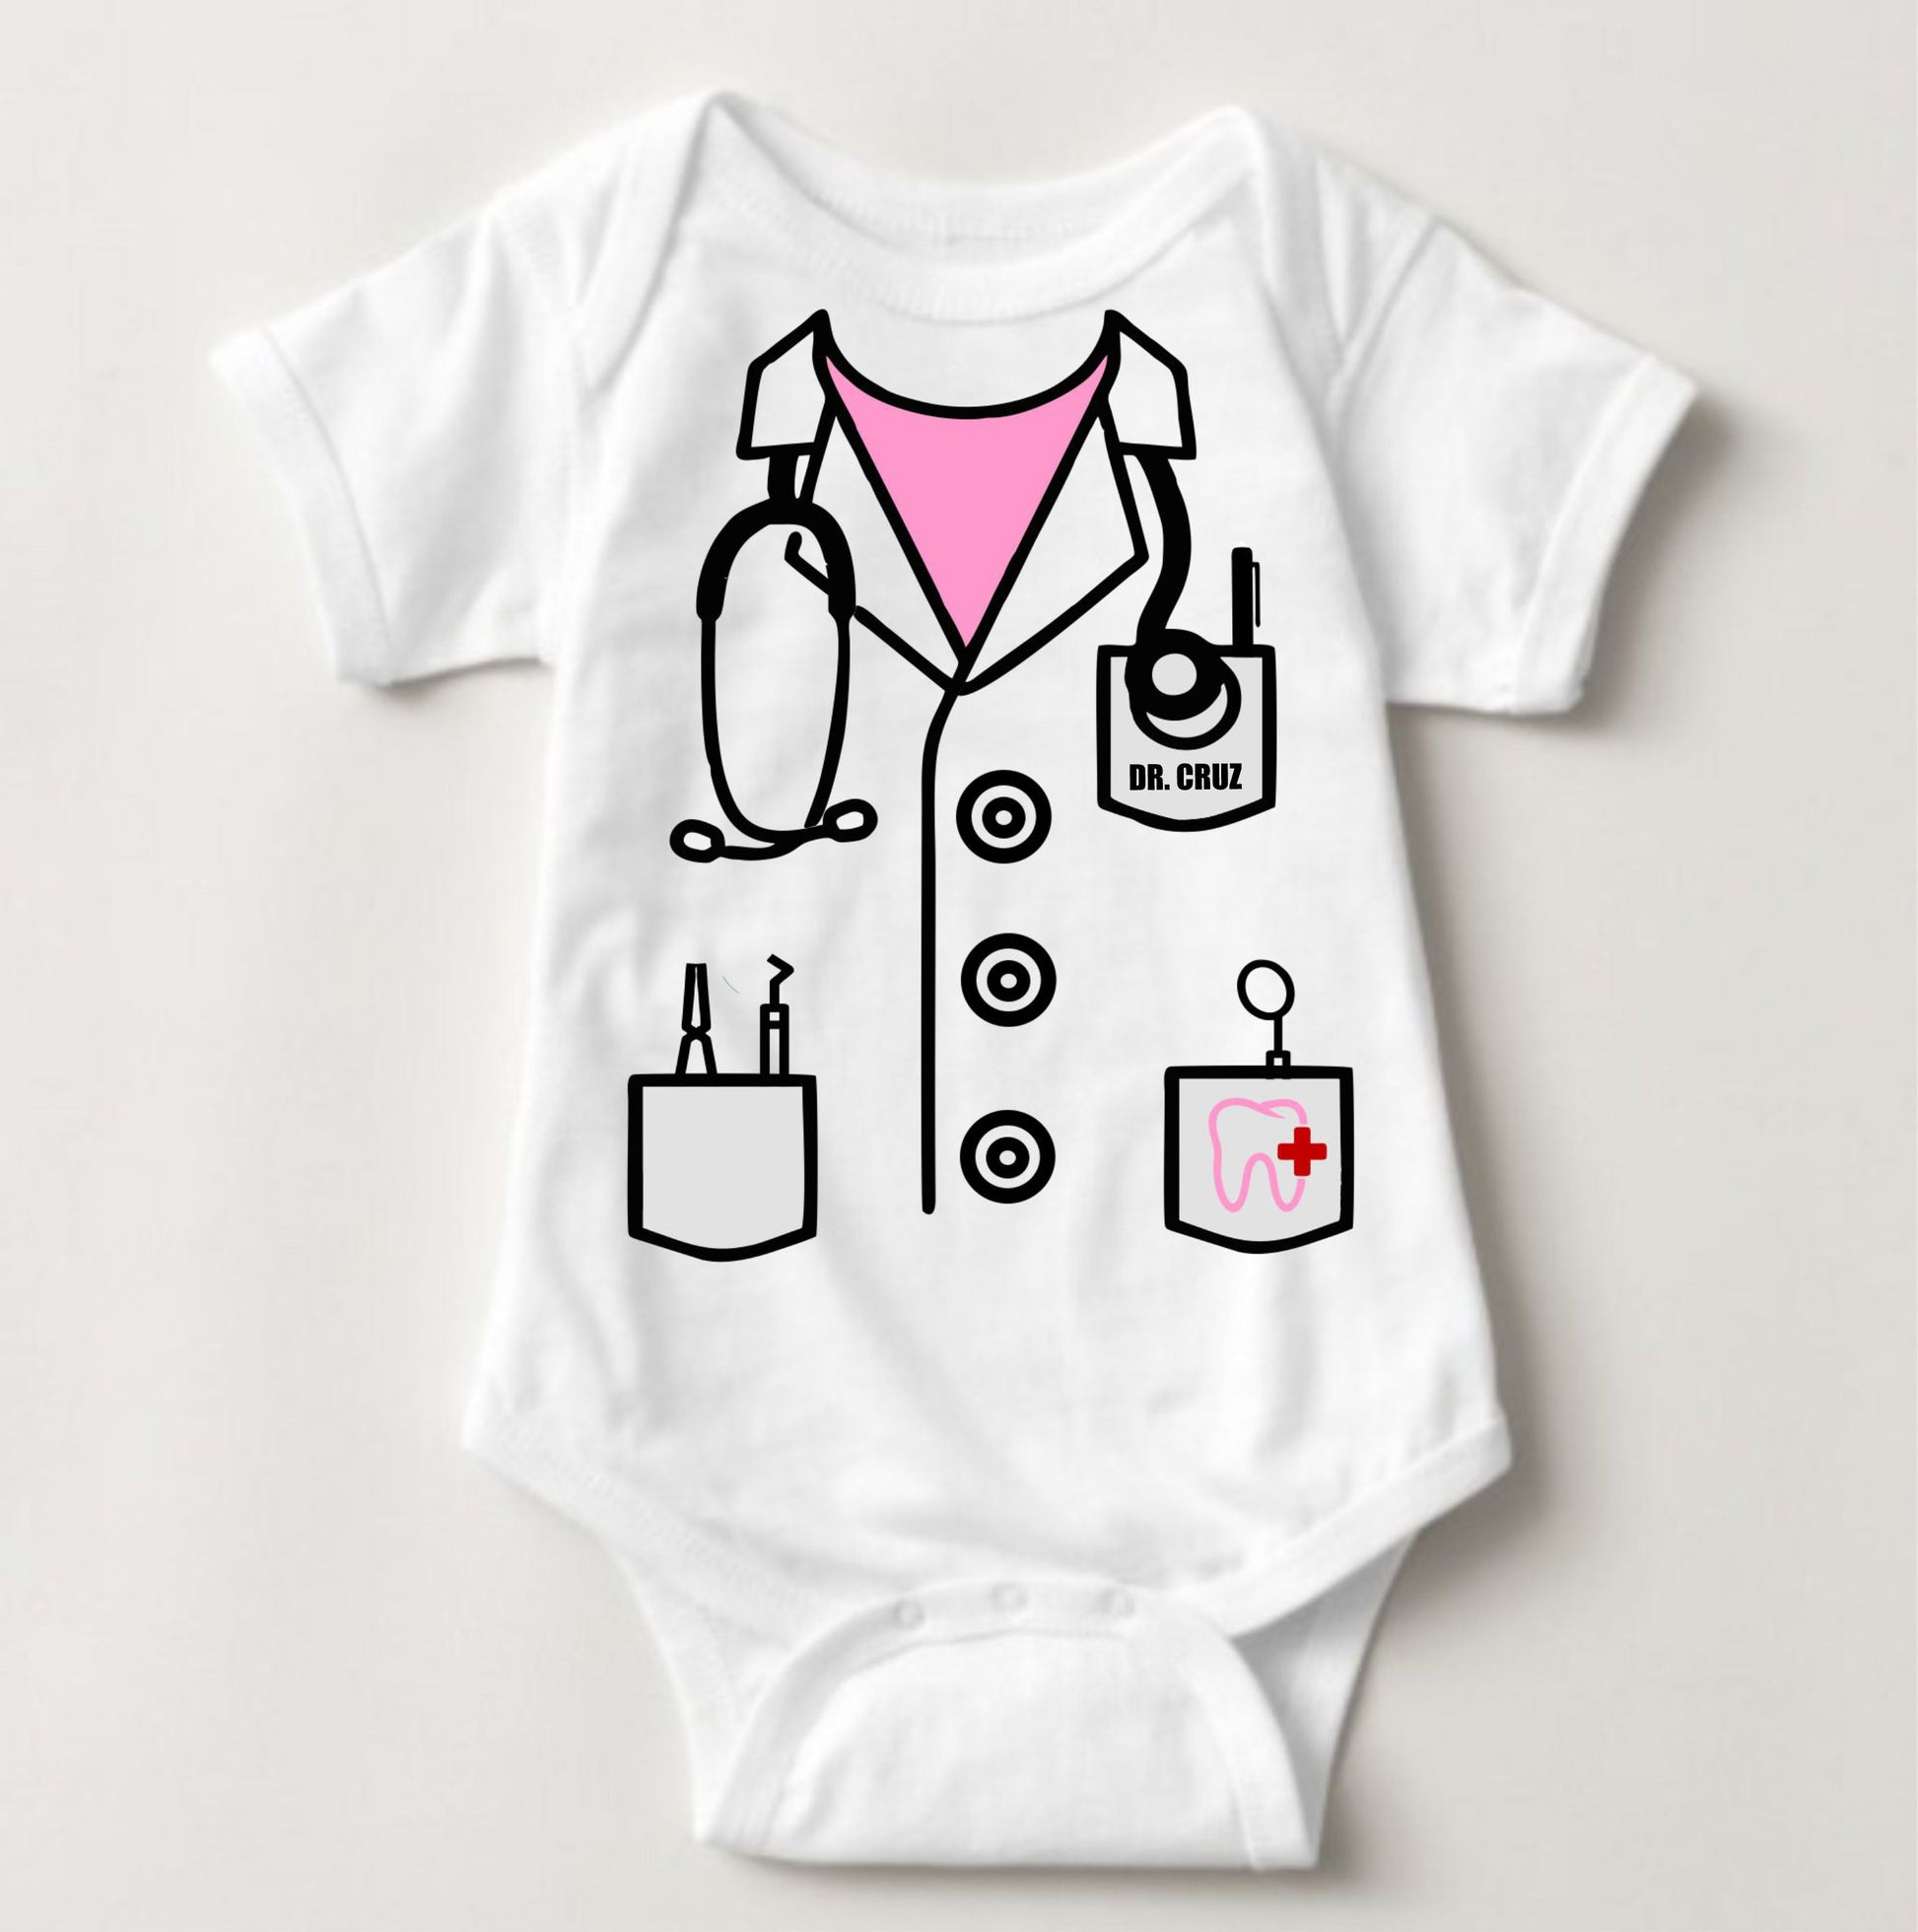 Baby Career Onesies - Dentist Scrub Suit Pink with FREE Name Print - MYSTYLEMYCLOTHING